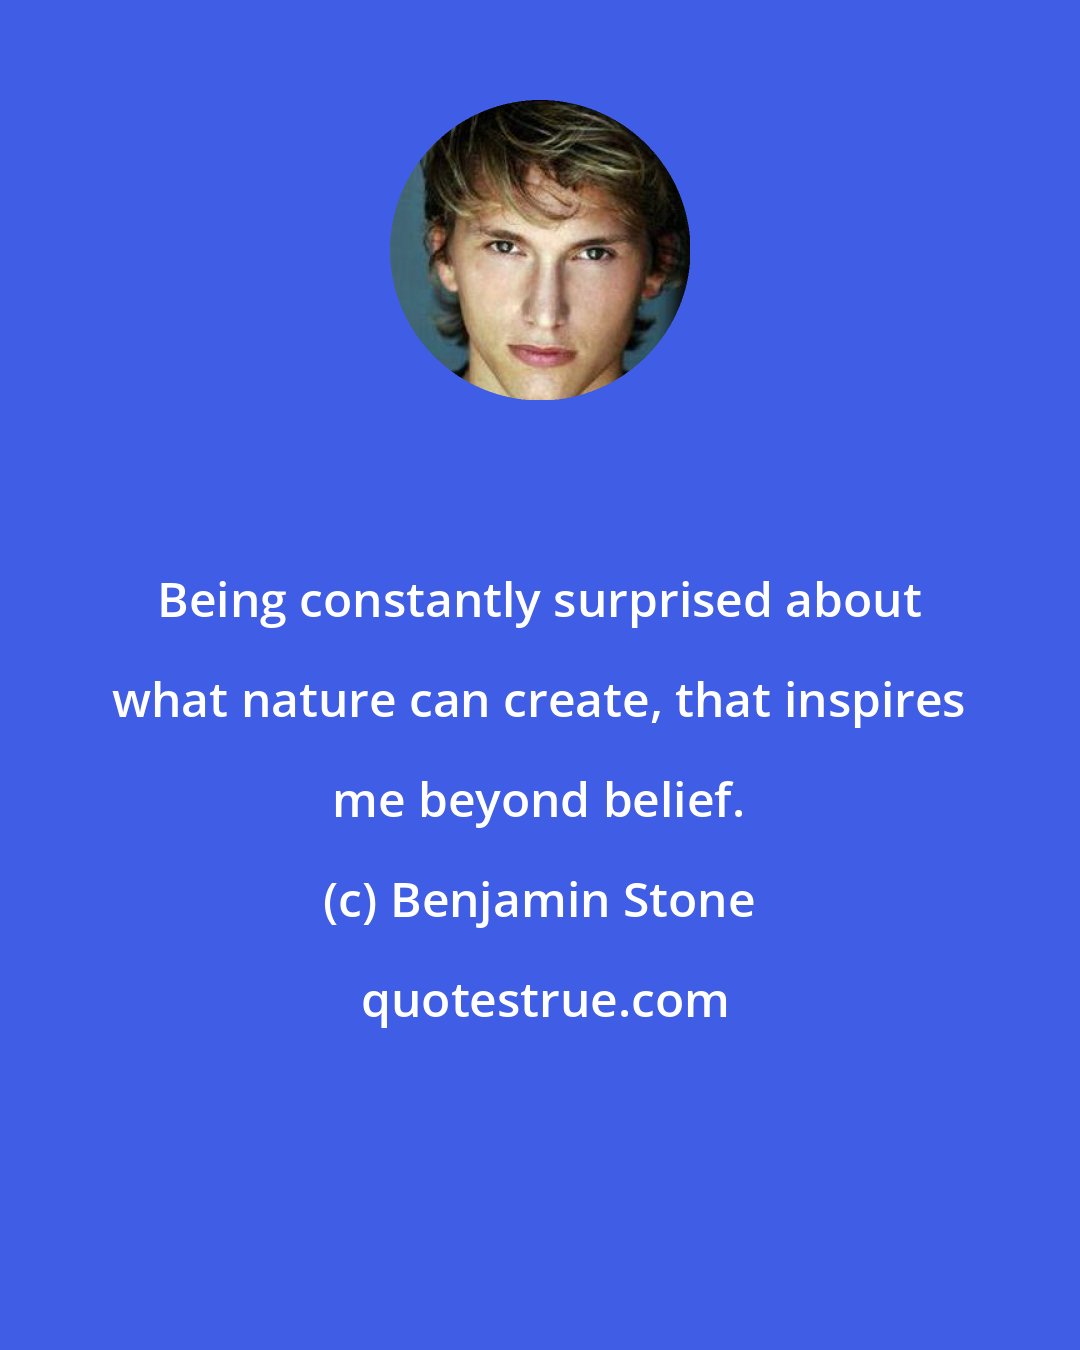 Benjamin Stone: Being constantly surprised about what nature can create, that inspires me beyond belief.